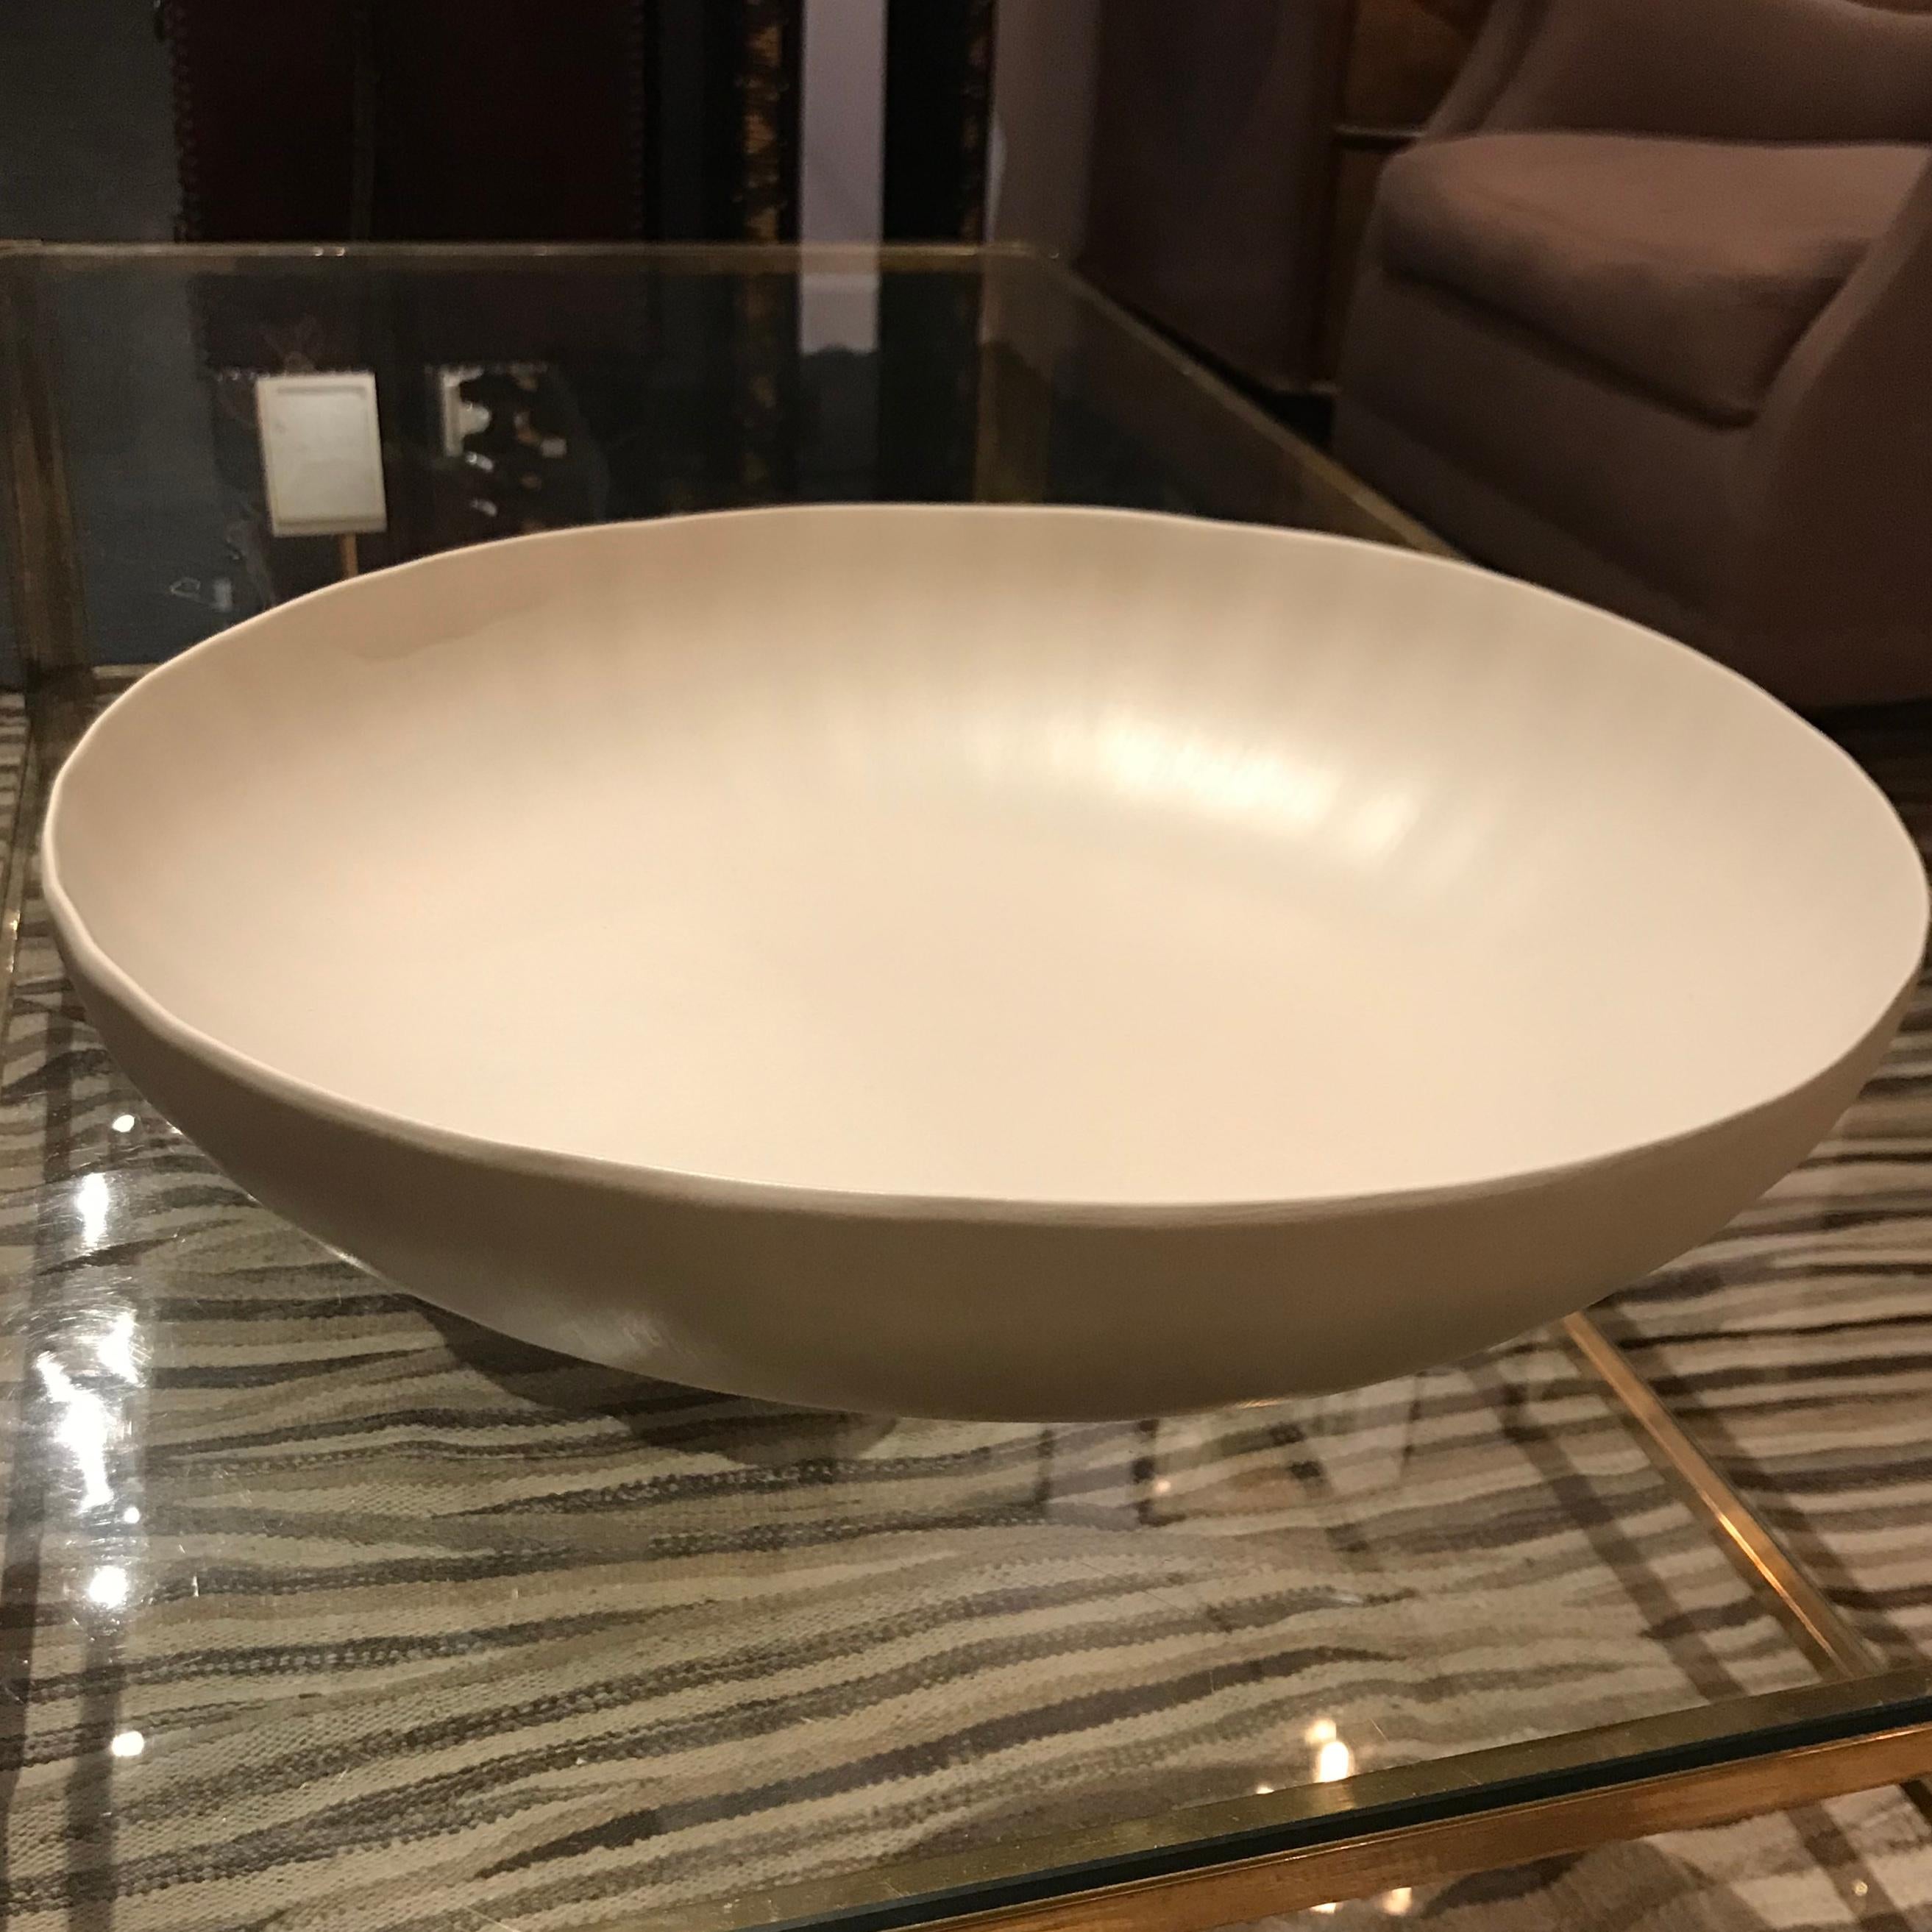 Handmade in Italy, from a collection of bowls and platters, each is unique in its organic shape and color.
This fine ceramic small (16